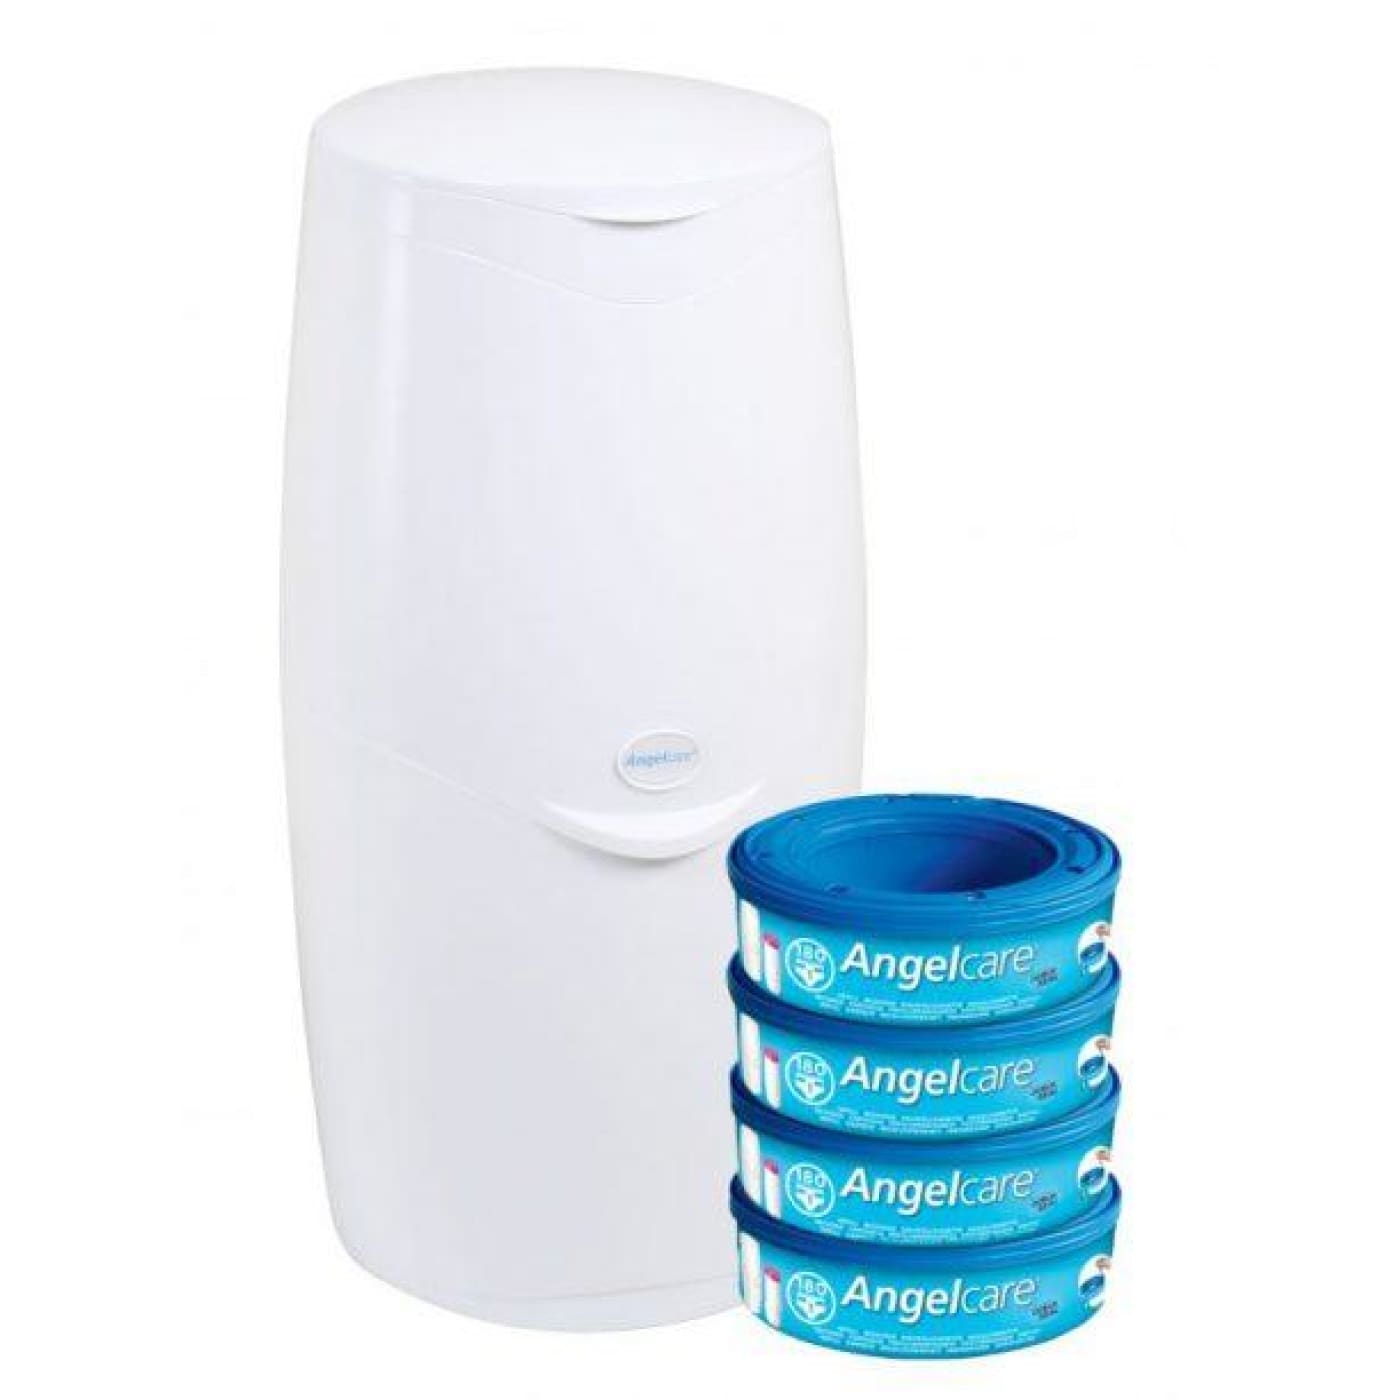 Angelcare Nappy System Starter Kit - BATHTIME & CHANGING - NAPPY BINS/REFILLS/BUCKETS